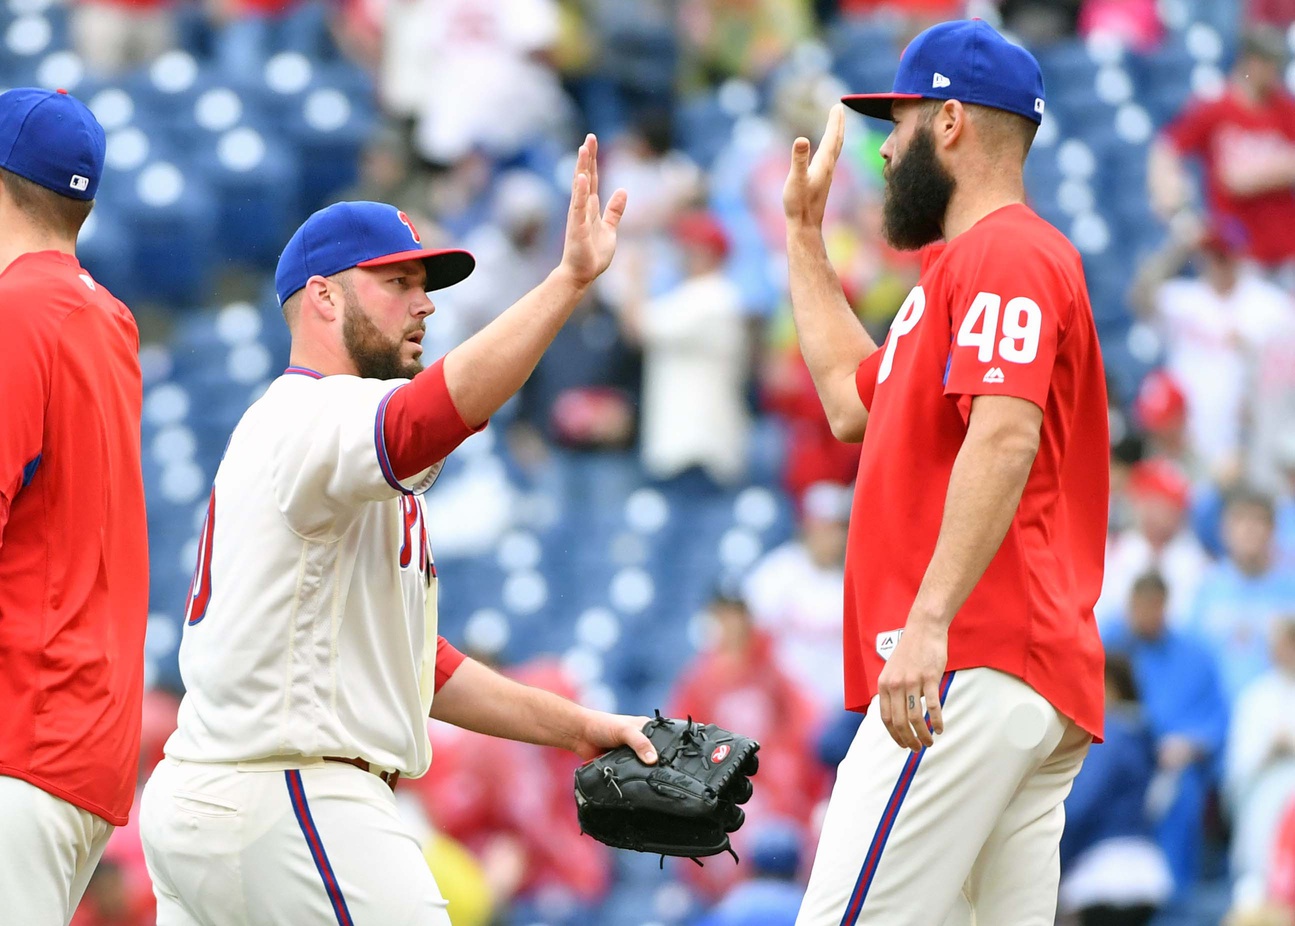 Jake Arrieta is Pretty Much Done for the Season